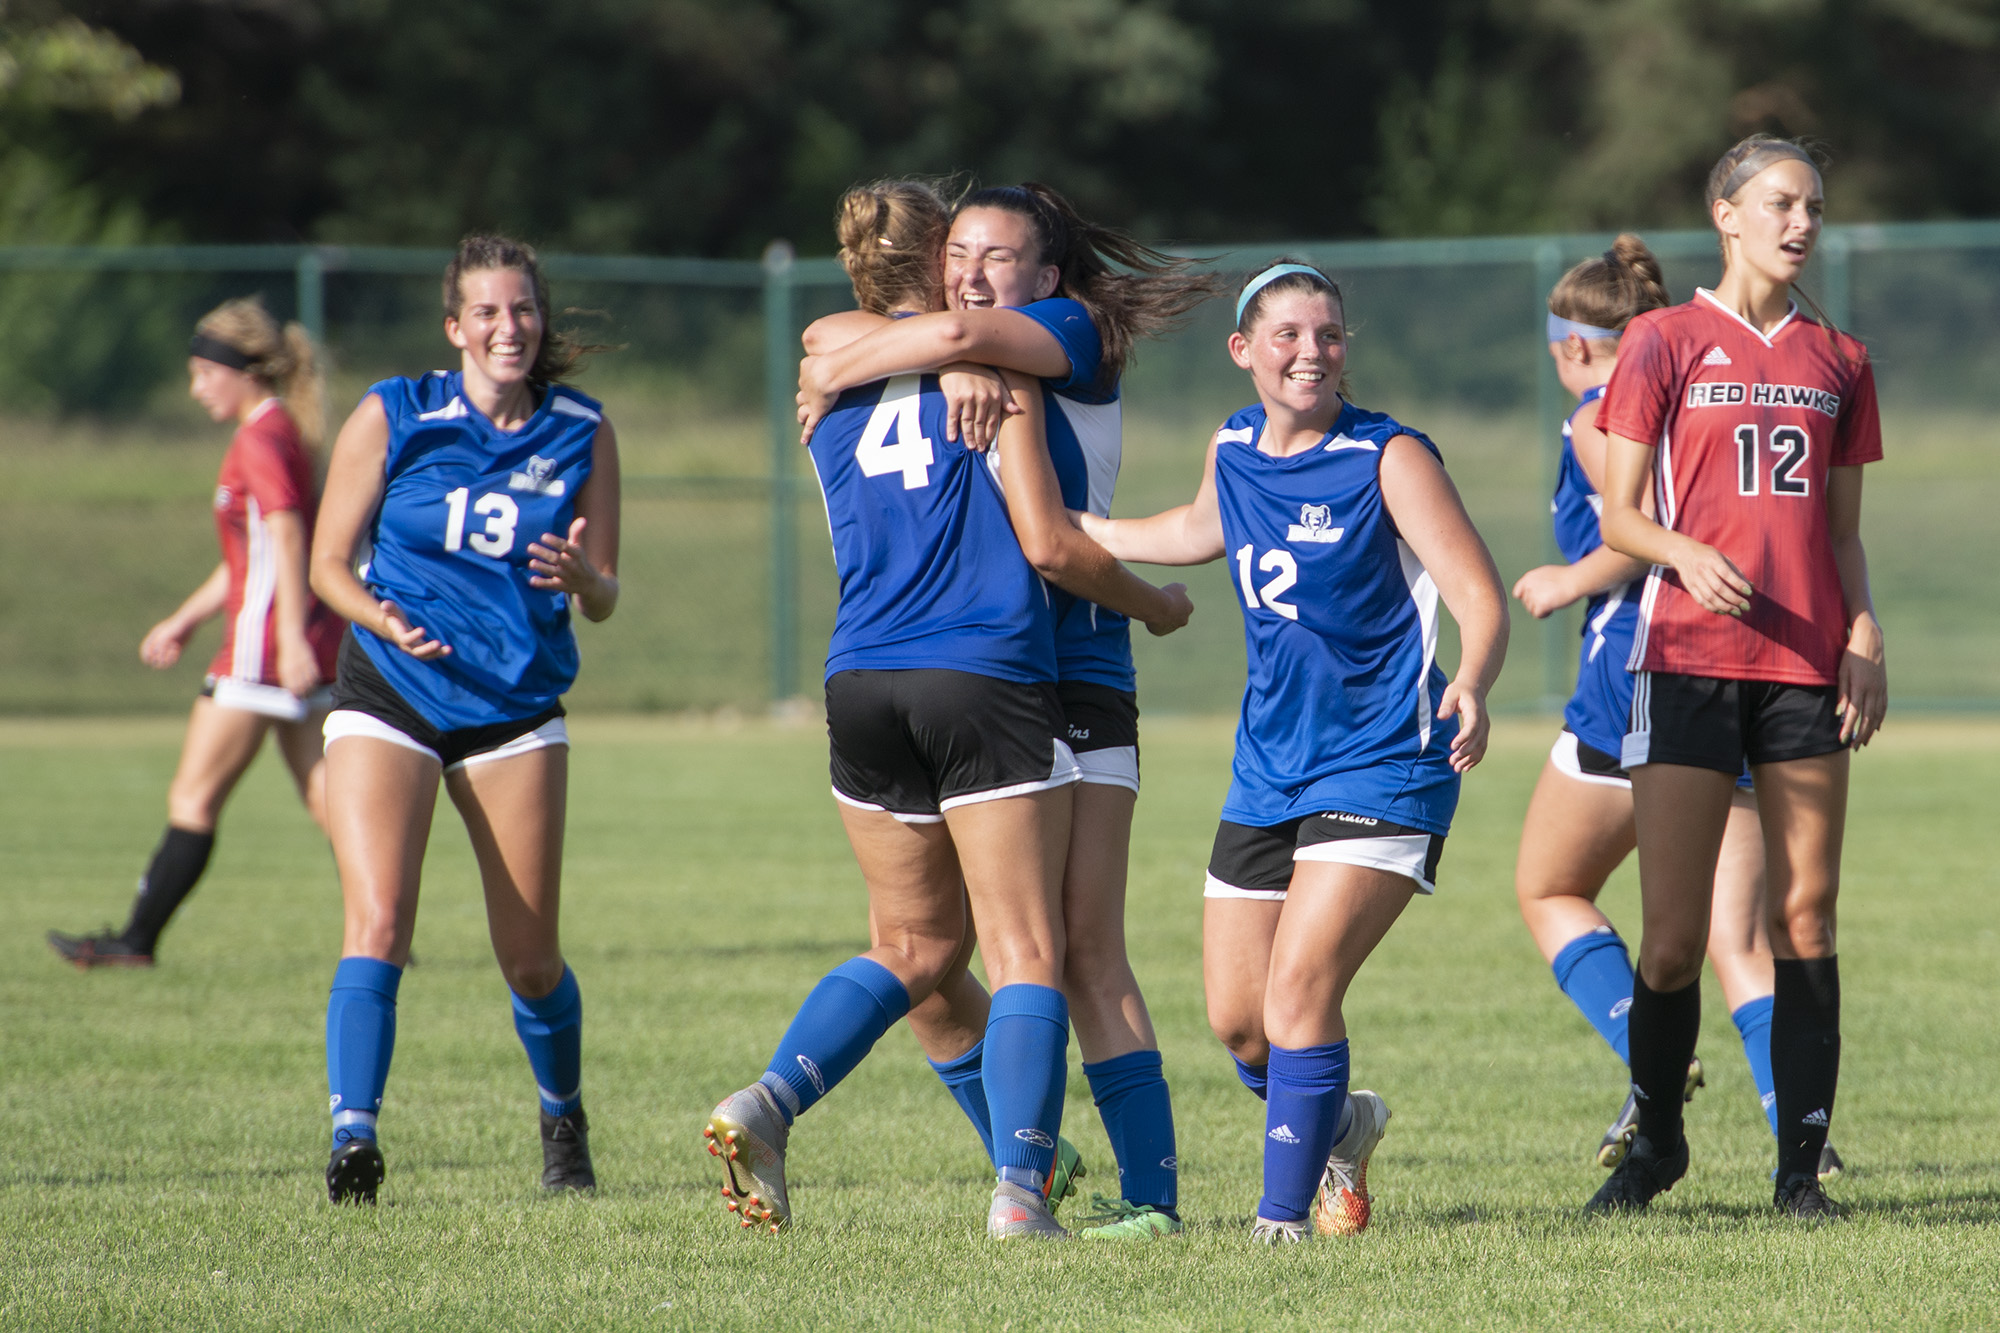 Members of the women's soccer team celebrate after scoring a goal.